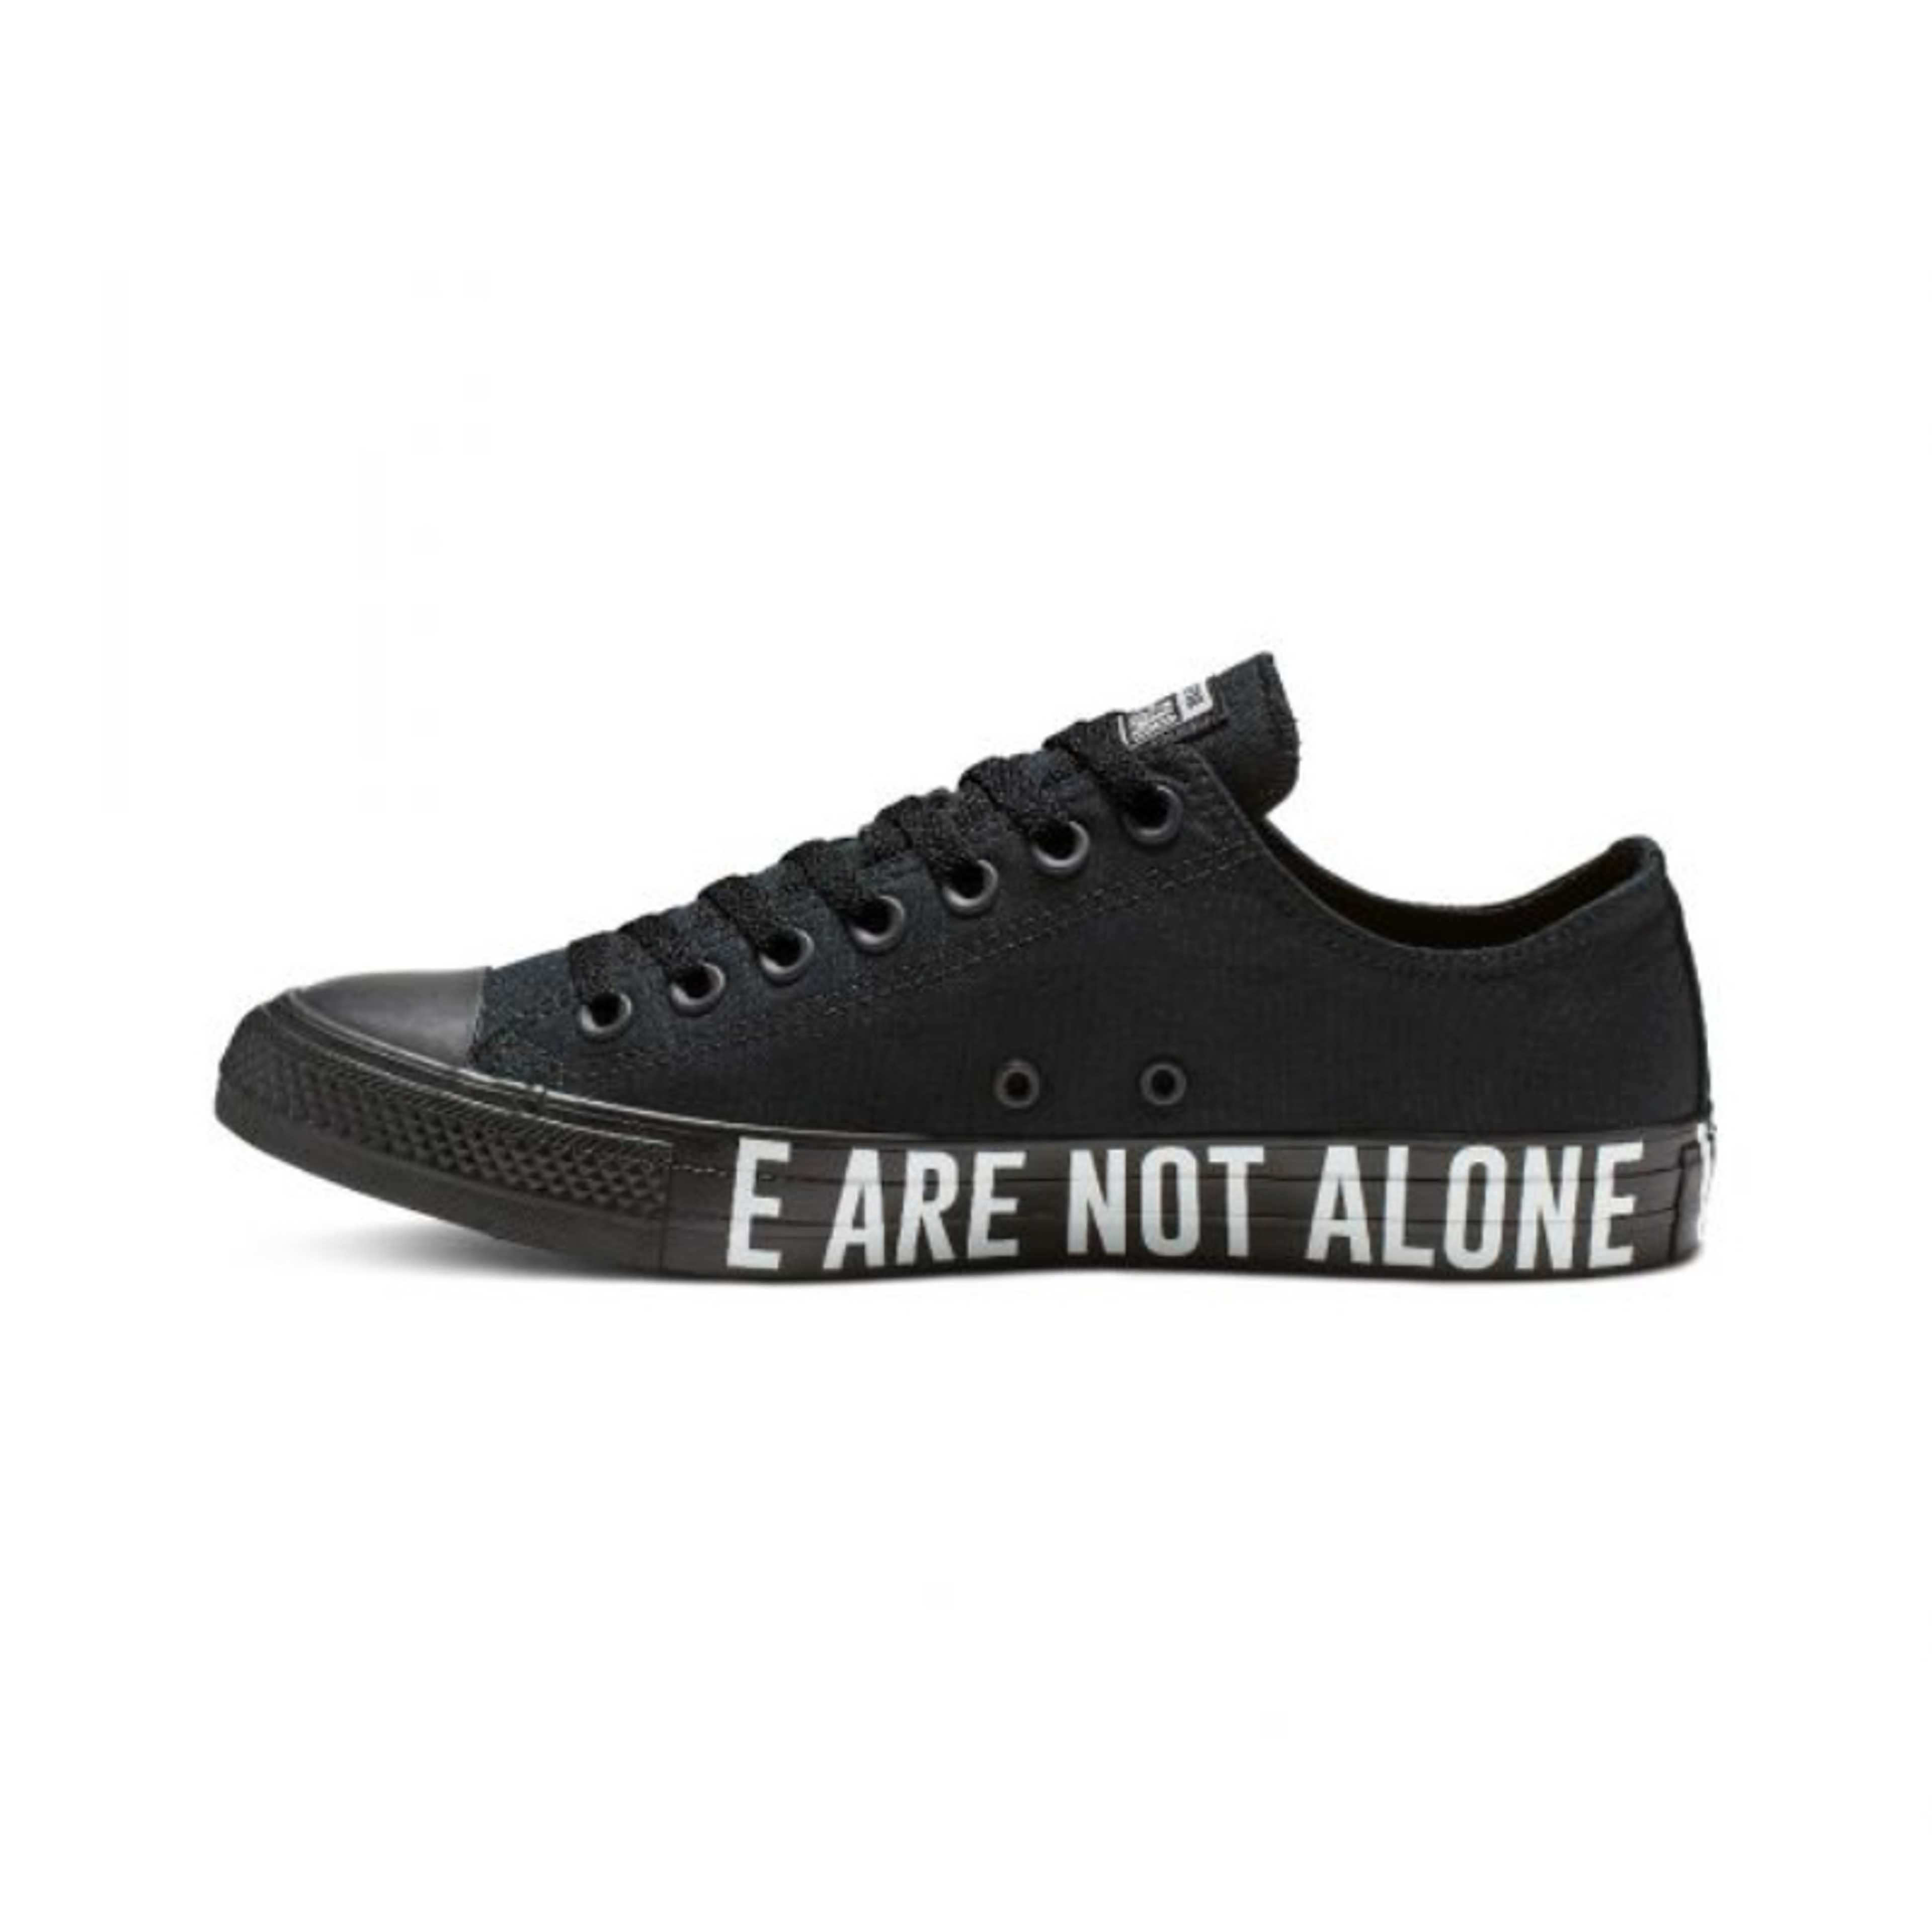 New Chuck Taylor All Star We Are Not Alone-15